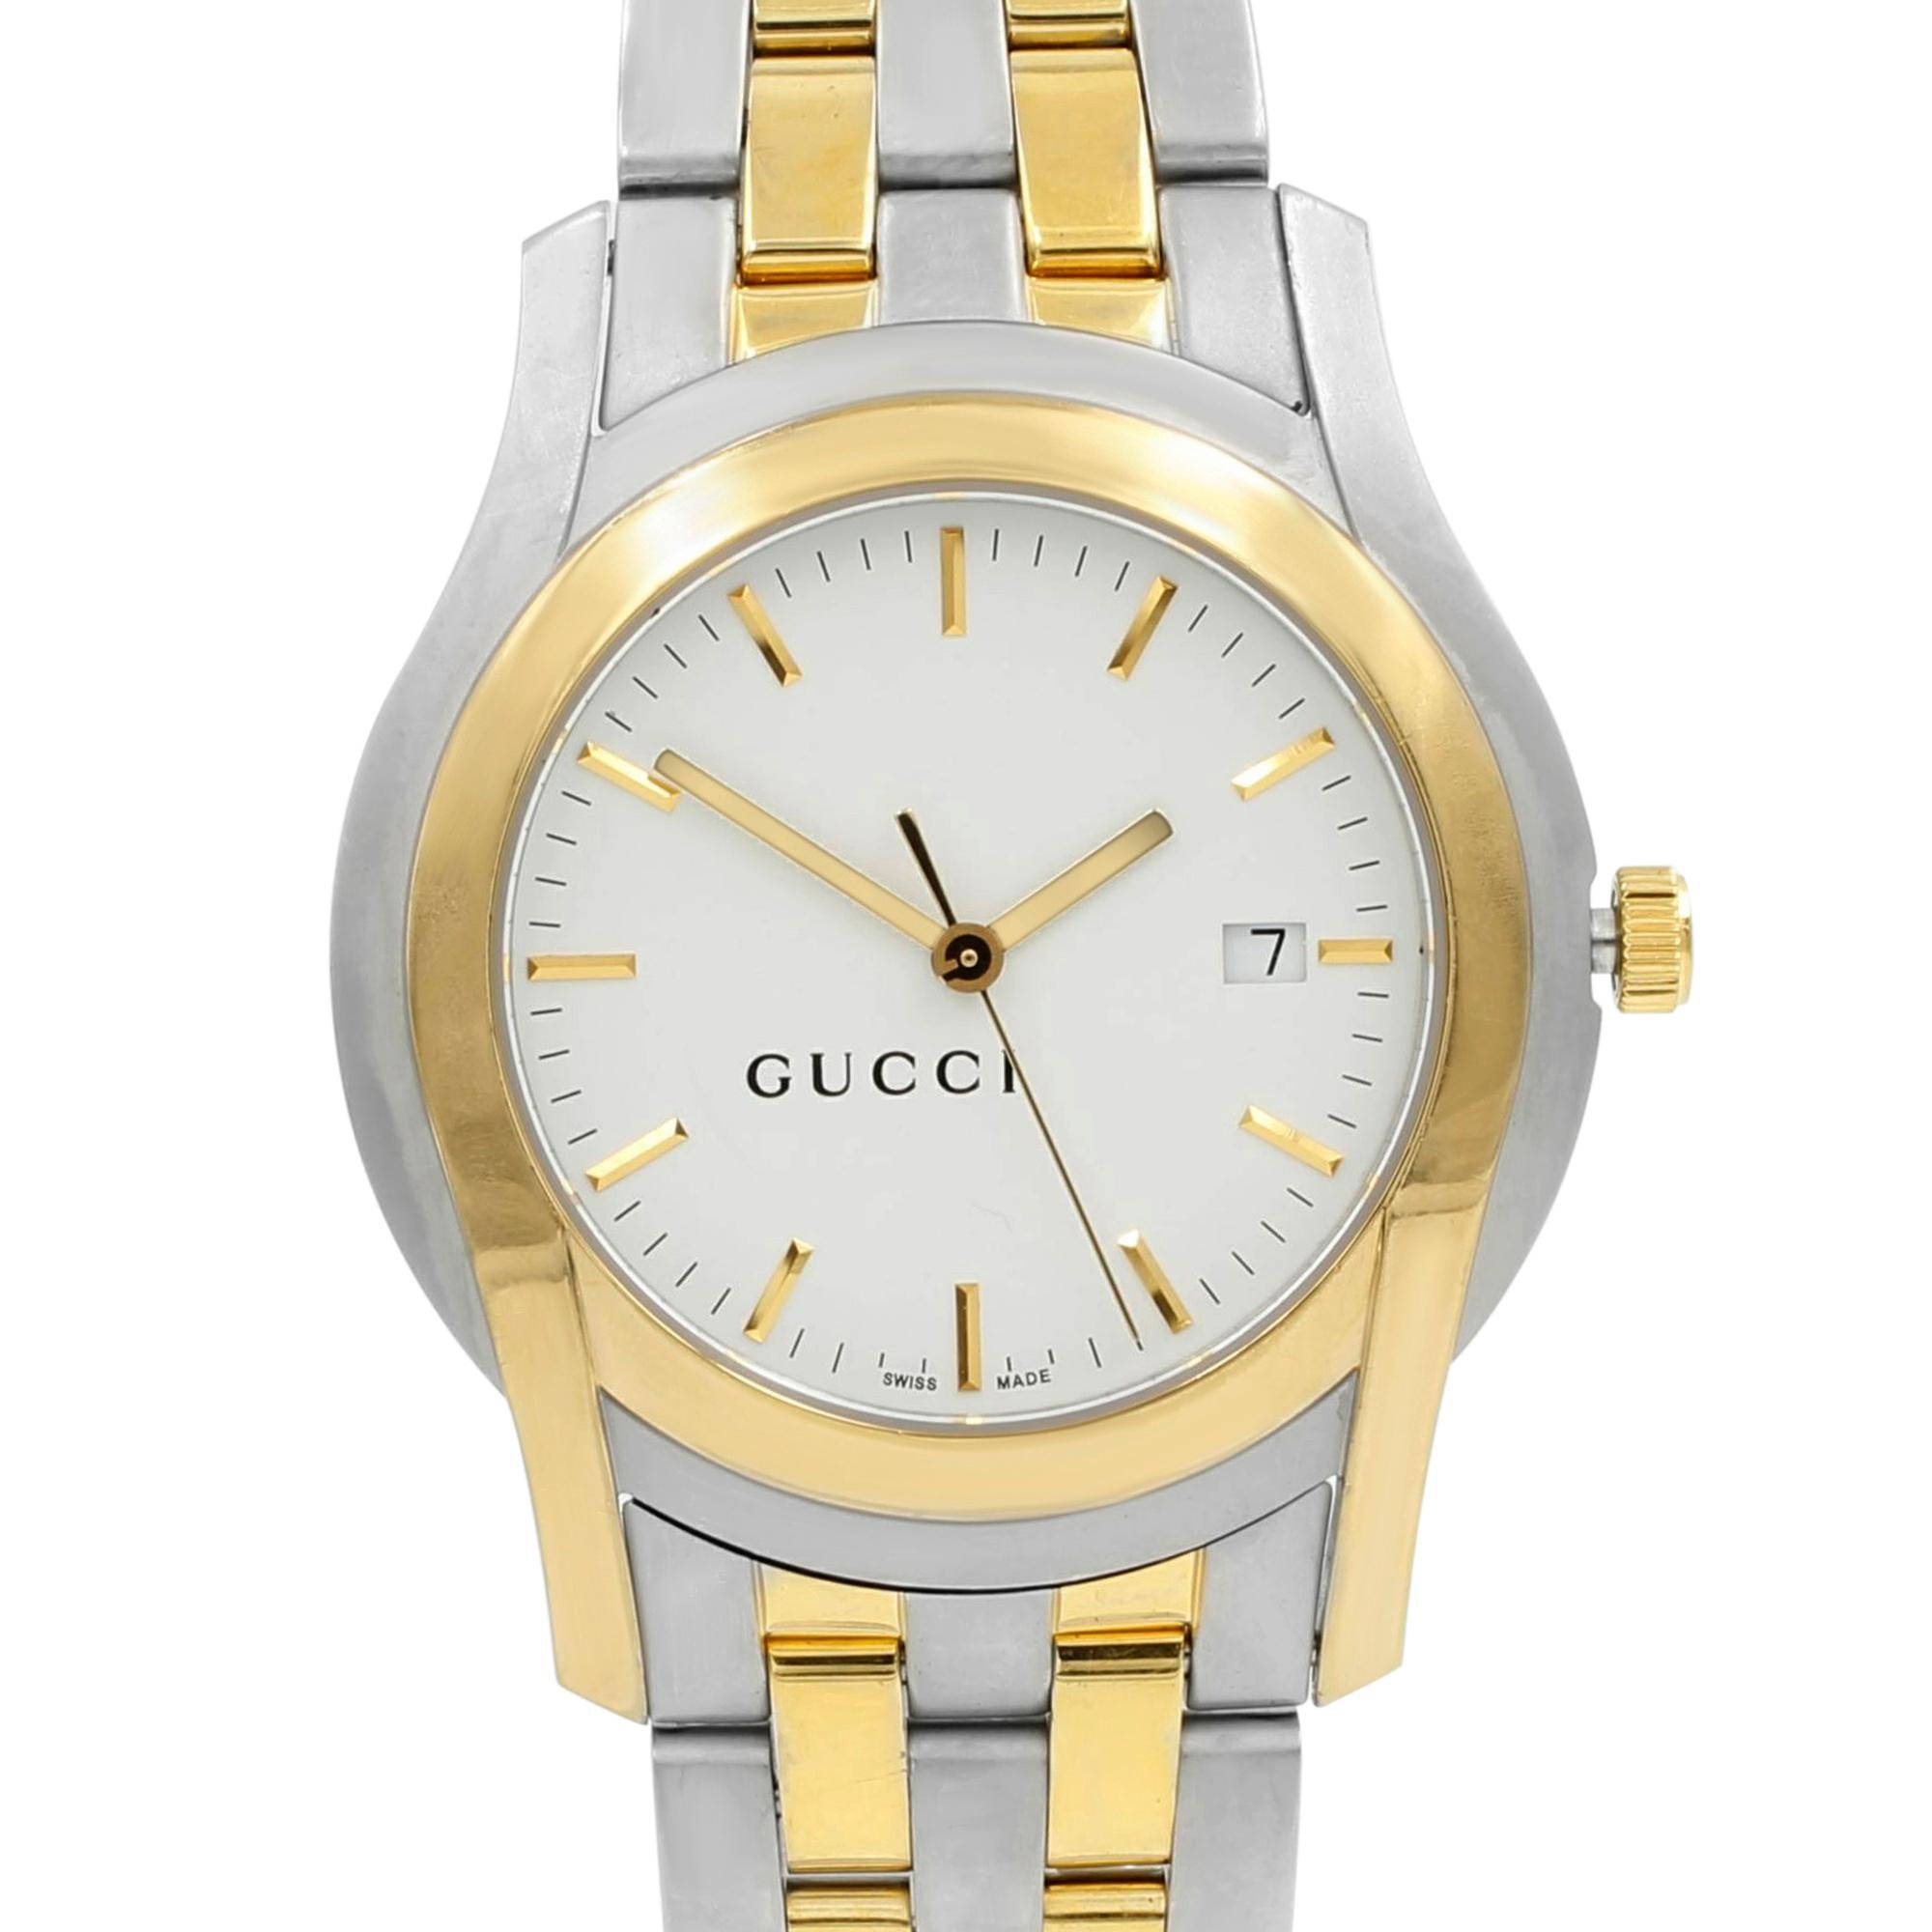 This pre-owned Gucci 5500 XL YA055216  is a beautiful men's timepiece that is powered by quartz (battery) movement which is cased in a stainless steel case. It has a round shape face, date indicator dial and has hand sticks style markers. It is